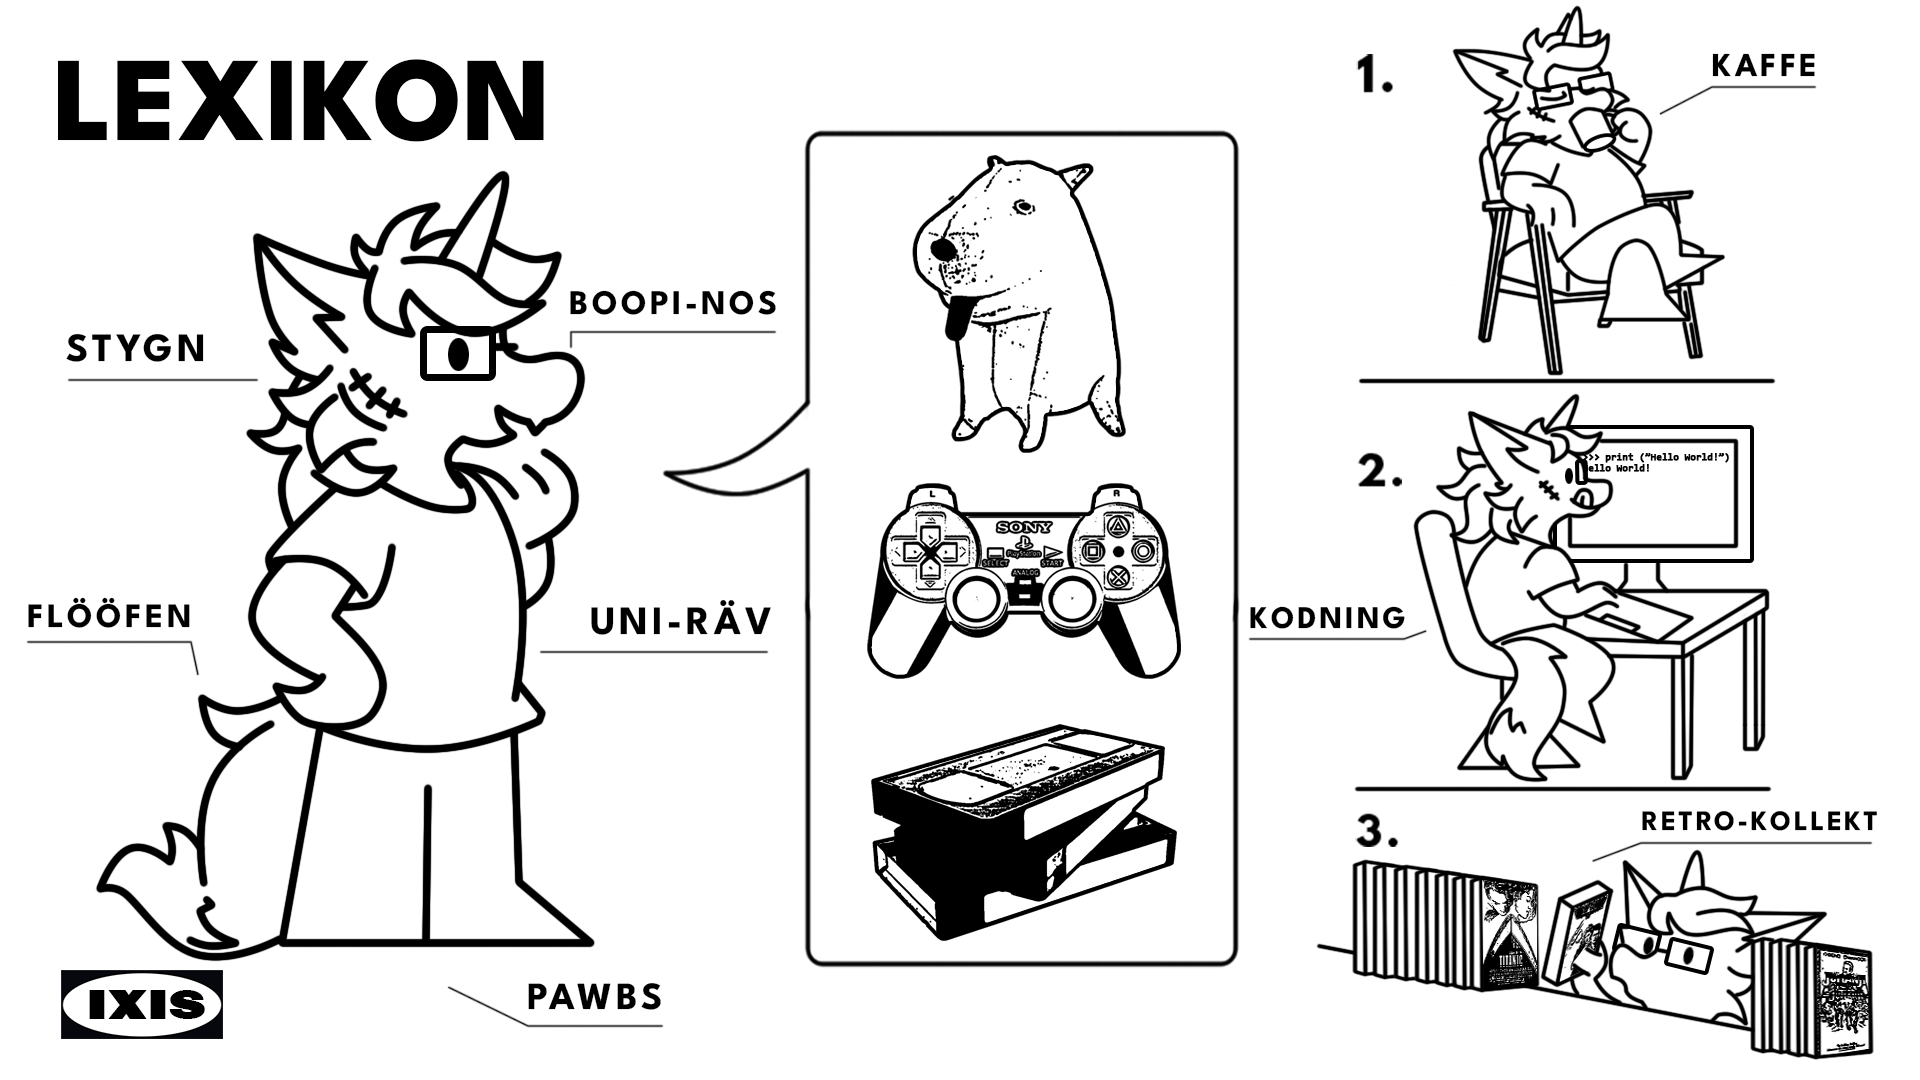 A reference sheet of Lexicon in the style of IKEA's manuals. There are multiple labels; UNI-RÄV points to the whole character, STYGN points to the stitch on their cheek, BOOPI-NOS to their nose, FLÖÖFEN to their tail, and PAWBS to their feet. Their speech bubble consists of an Ownaj ENA Hourglass Dog plush, a PlayStation 2 controller, and a stack of VHS tapes. On the right, there are three instruction panels; panel 1 is labeled as KAFFE with Lexicon sitting down and drinking out of a mug, panel 2 is labeled as KODNING with Lexicon sitting at a computer executing a Hello World command, and panel 3 is labeled as RETRO-KOLLEKT with Lexicon organizing a shelf with VHS tapes, notable titles including Titanic, Top Gun, and Jumanji.